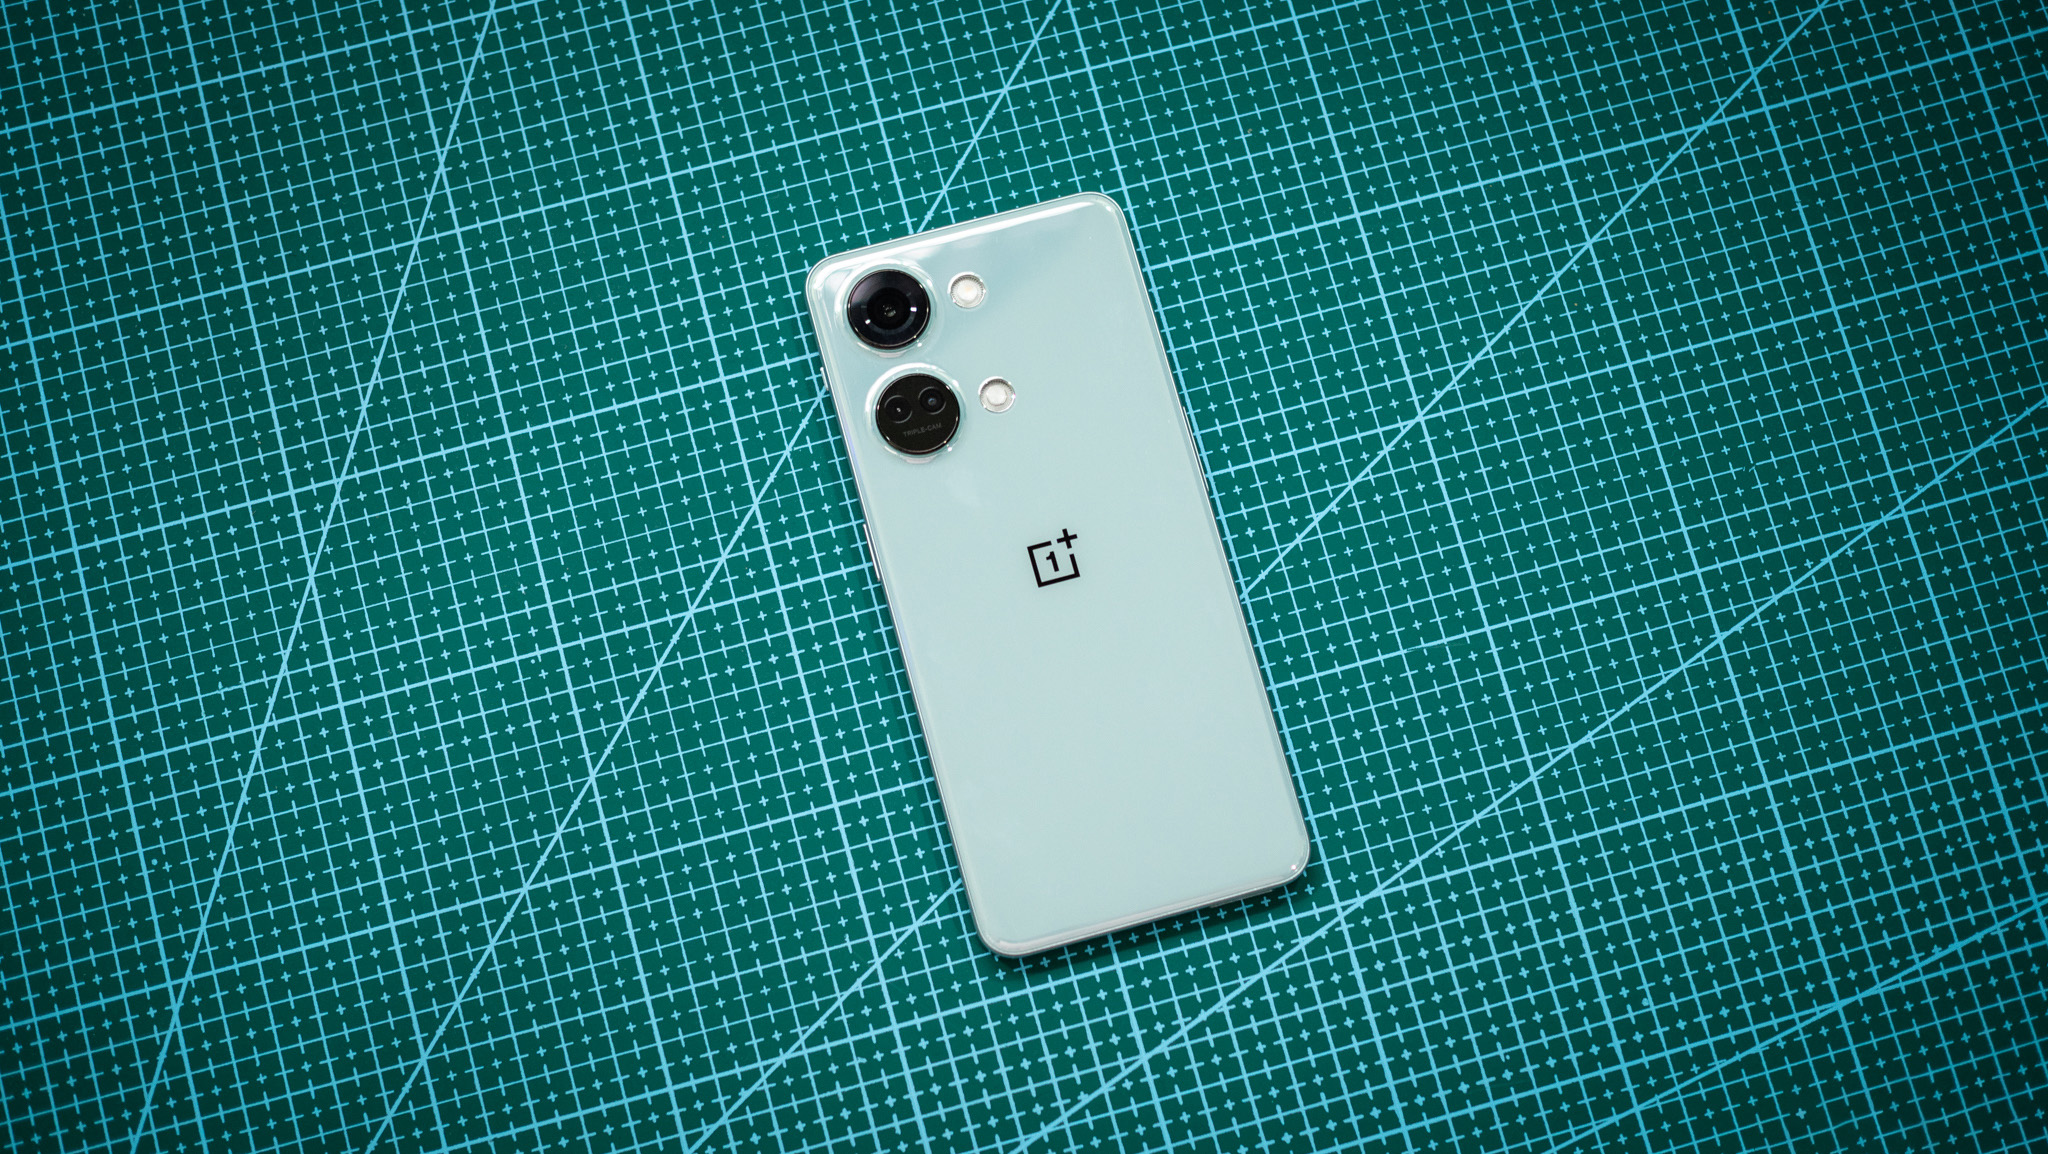 OnePlus Nord 3 coming with 50MP camera and 120Hz display